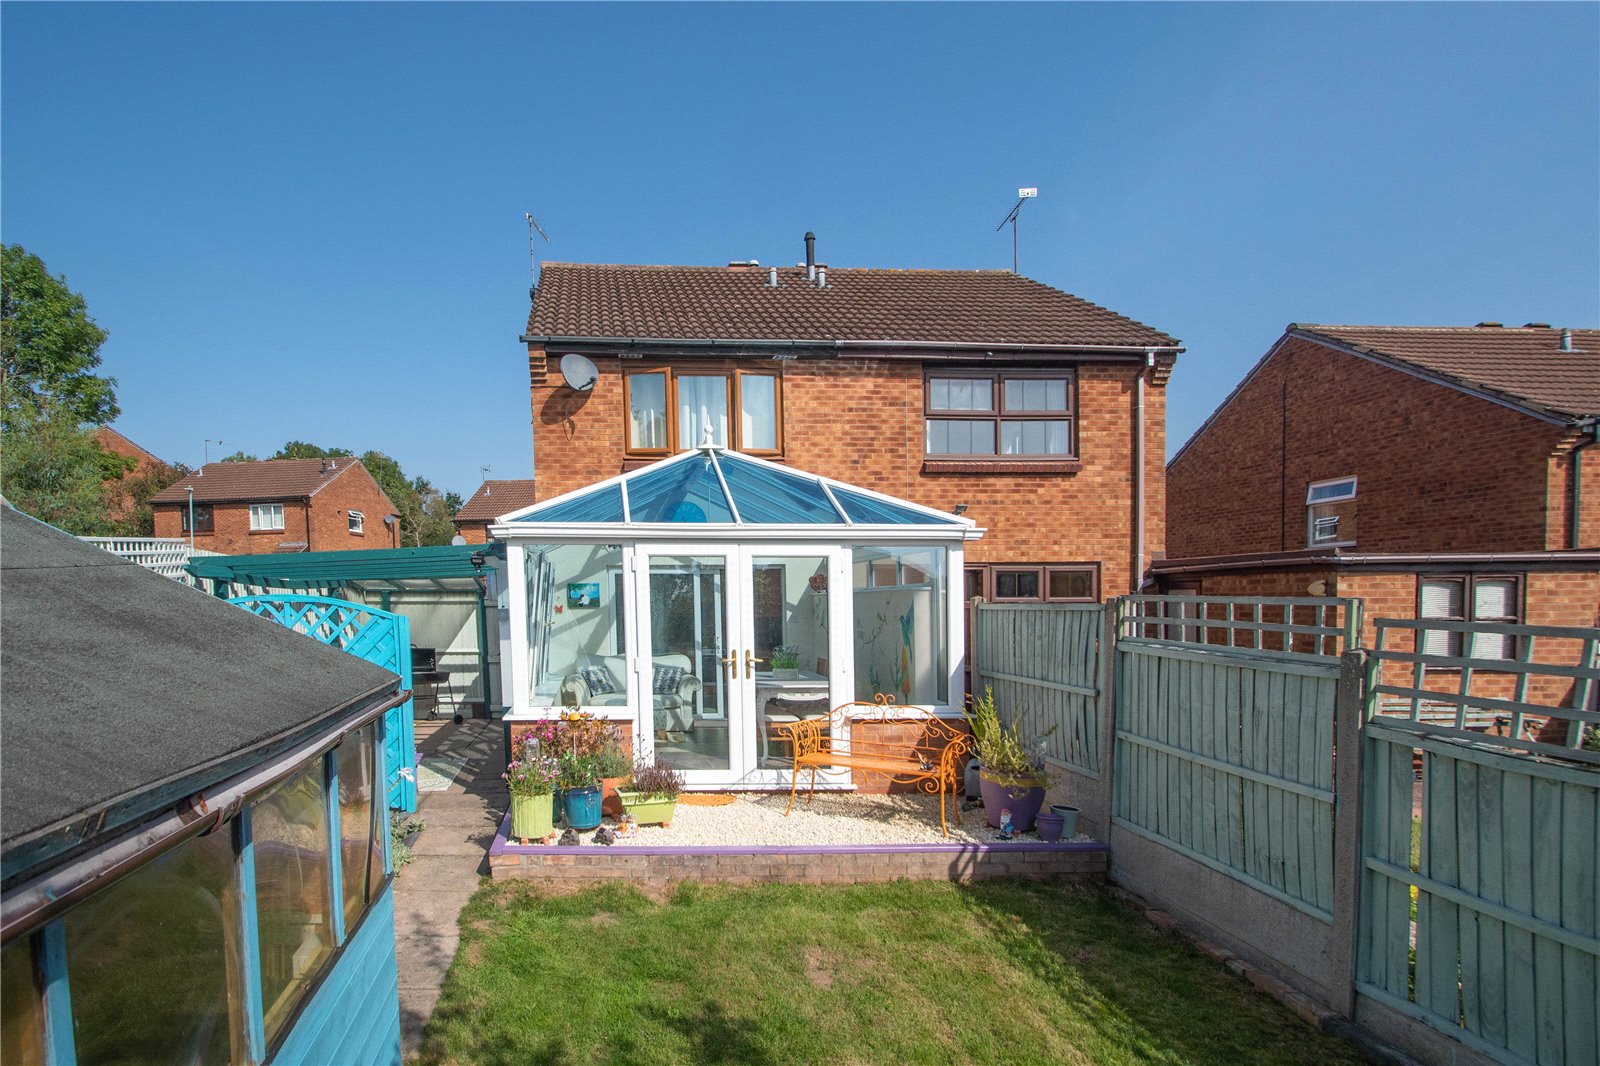 2 bed house for sale in Rangeworthy Close, Redditch 12